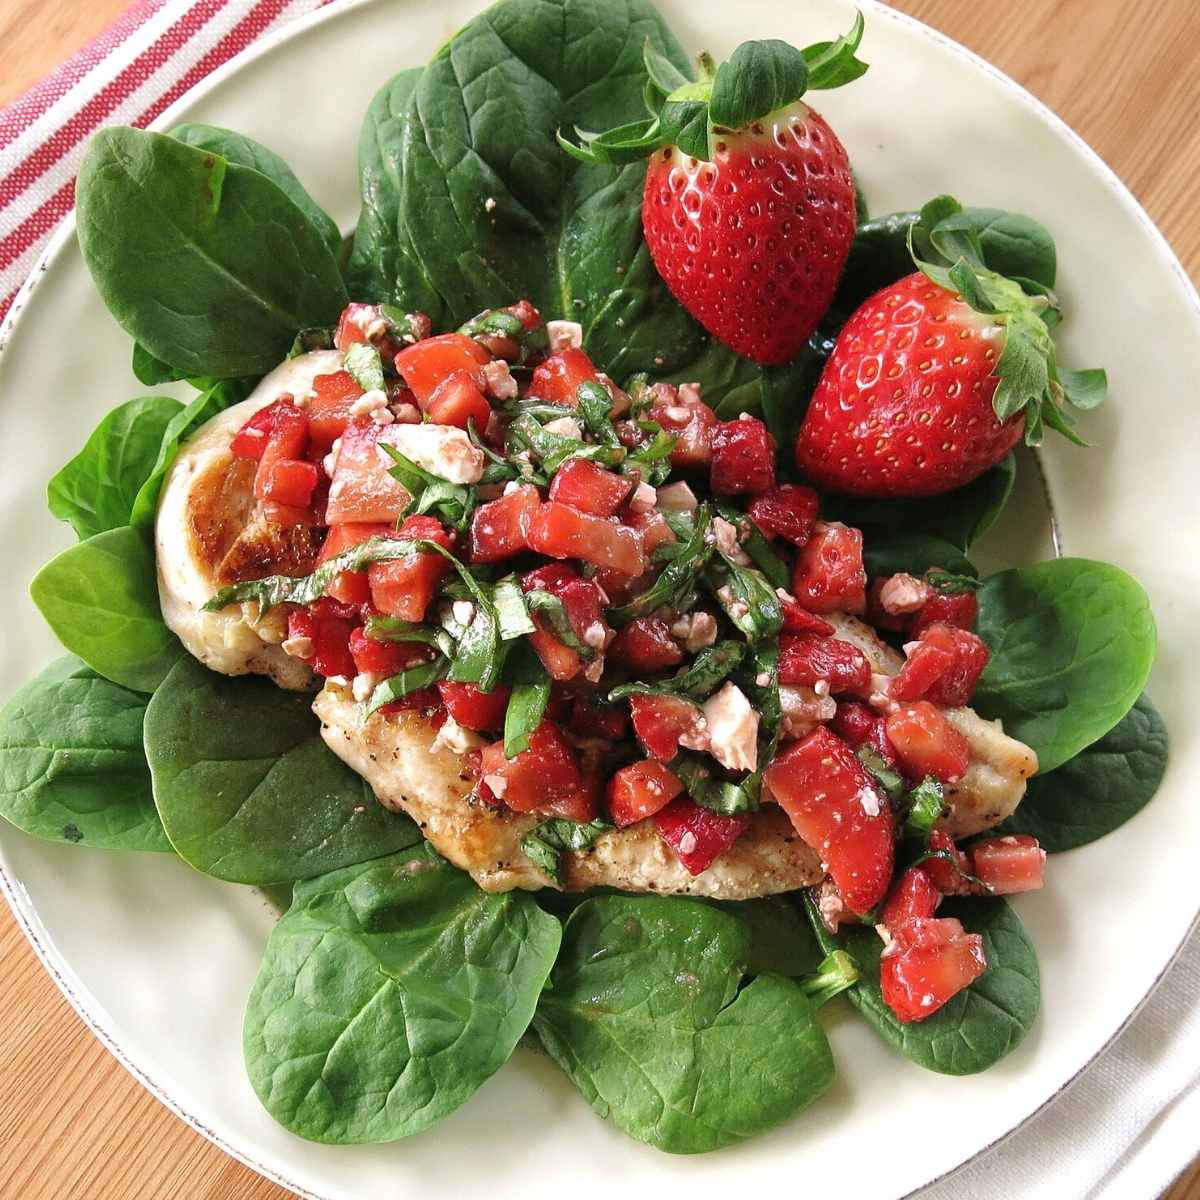 Strawberry Chicken with a bruschetta topping with basil and balsamic vinegar on a plate with spinach leaves and more strawberries in the background.